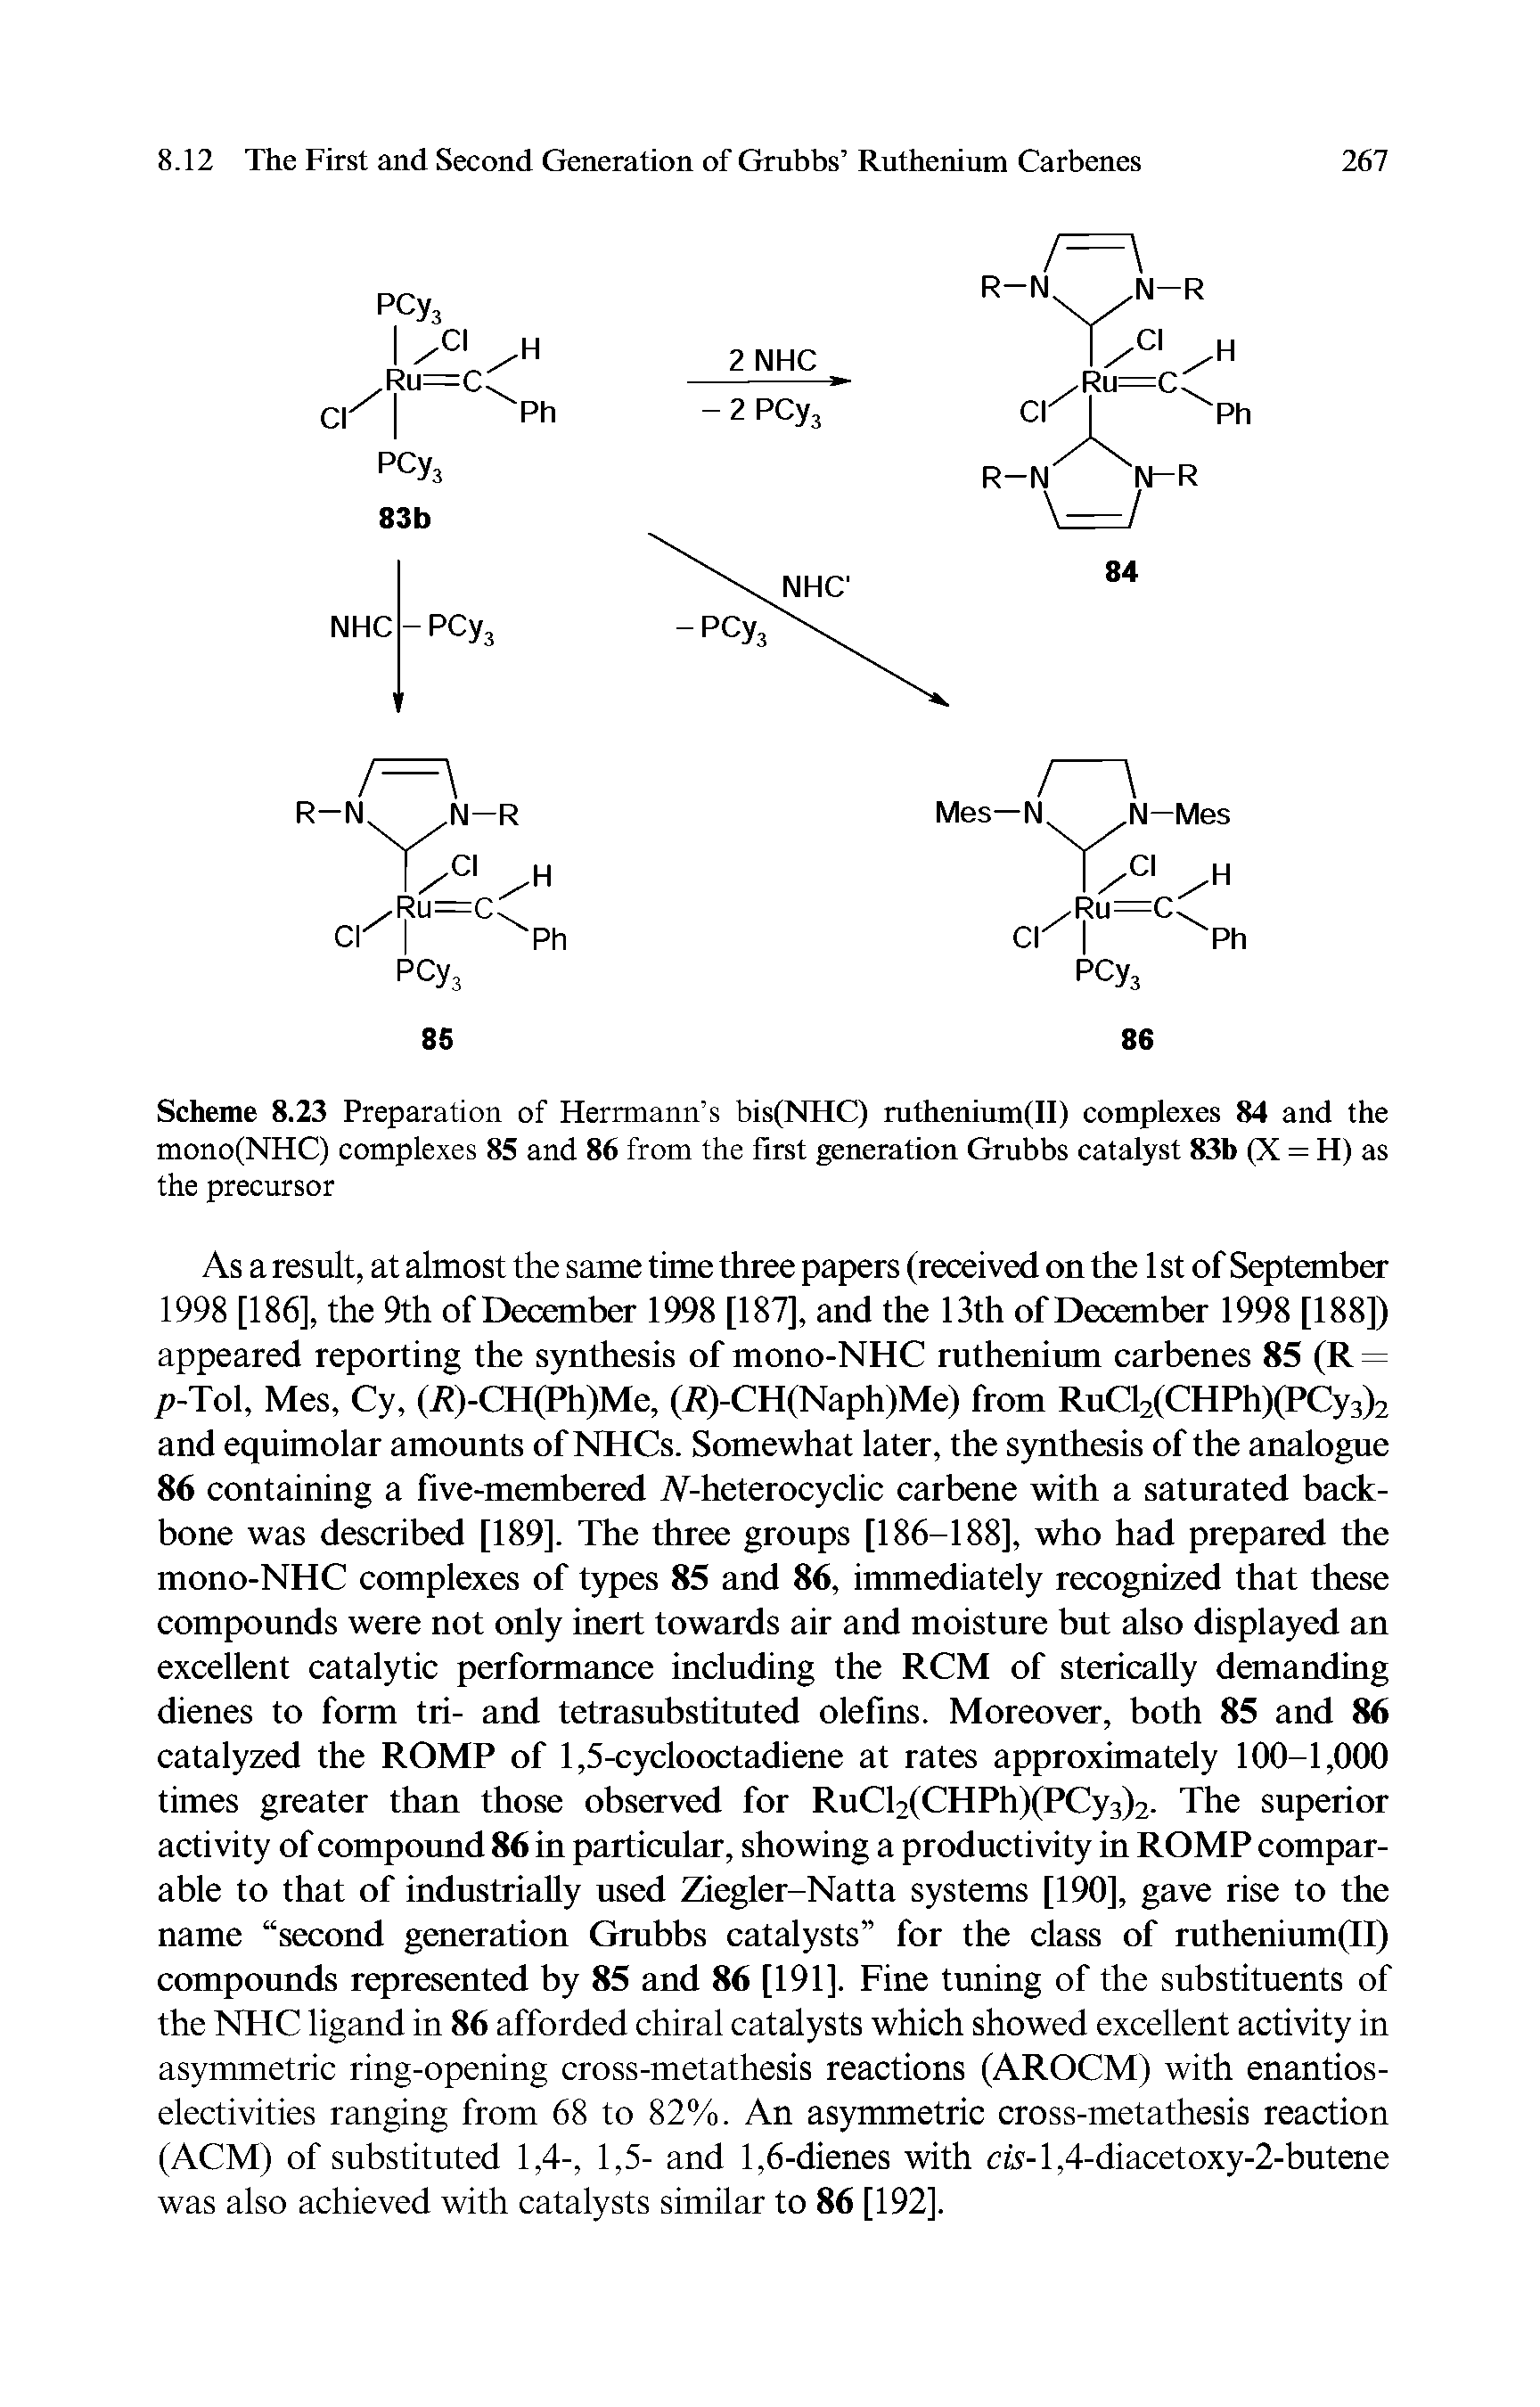 Scheme 8.23 Preparation of Herrmann s bis(NHC) ruthenium(II) complexes 84 and the mono(NHC) complexes 85 and 86 from the first generation Grubbs catalyst 83b (X = H) as the precursor...